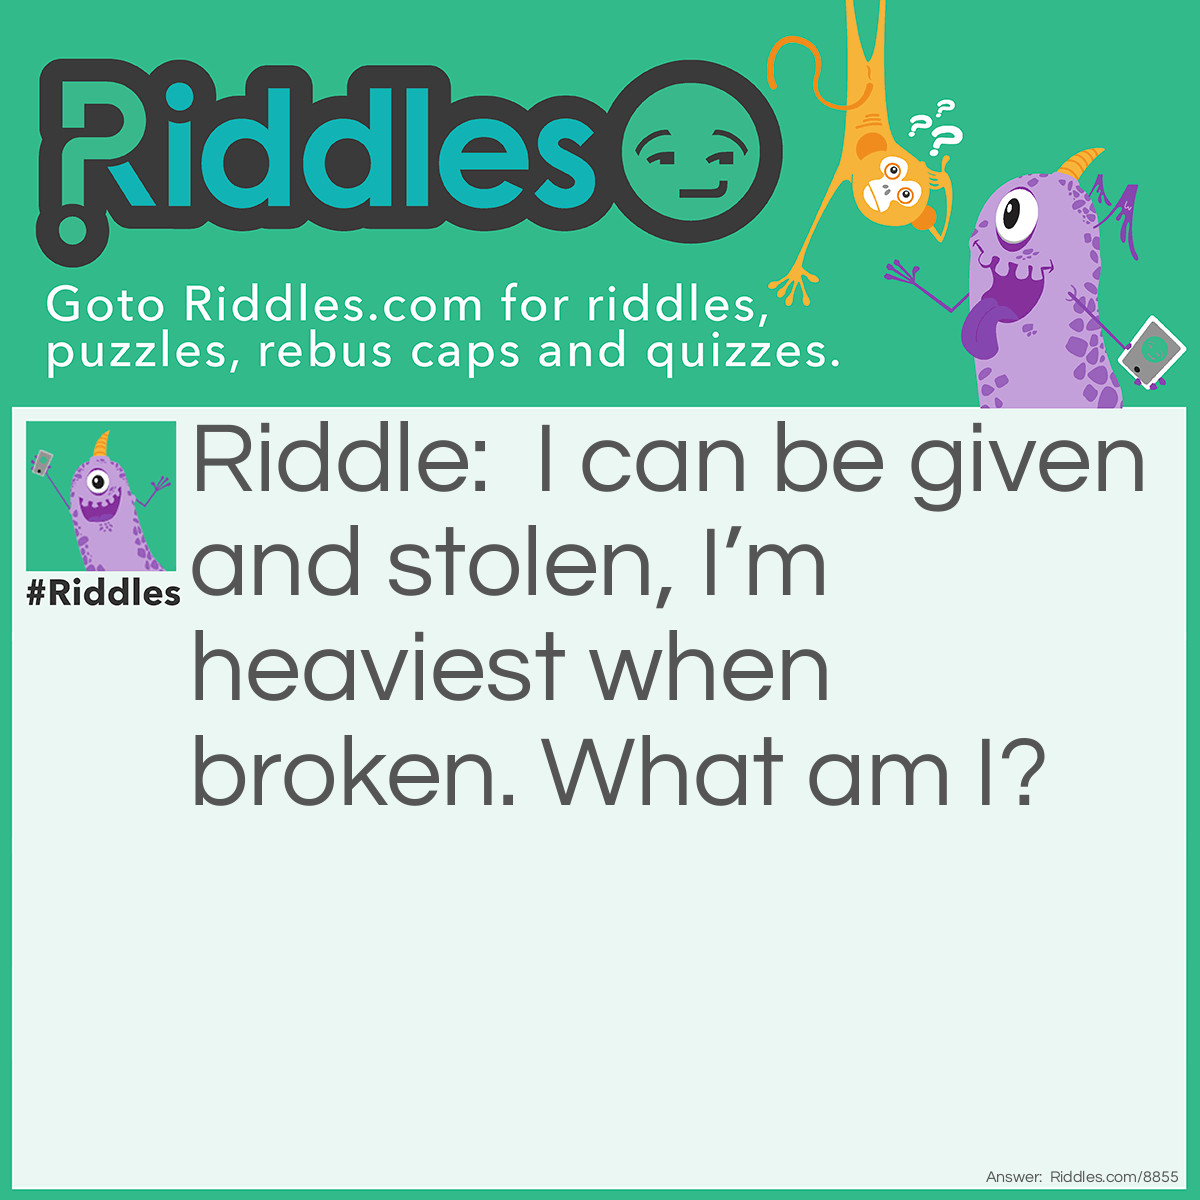 Riddle: I can be given and stolen, I'm heaviest when broken. What am I? Answer: A heart.